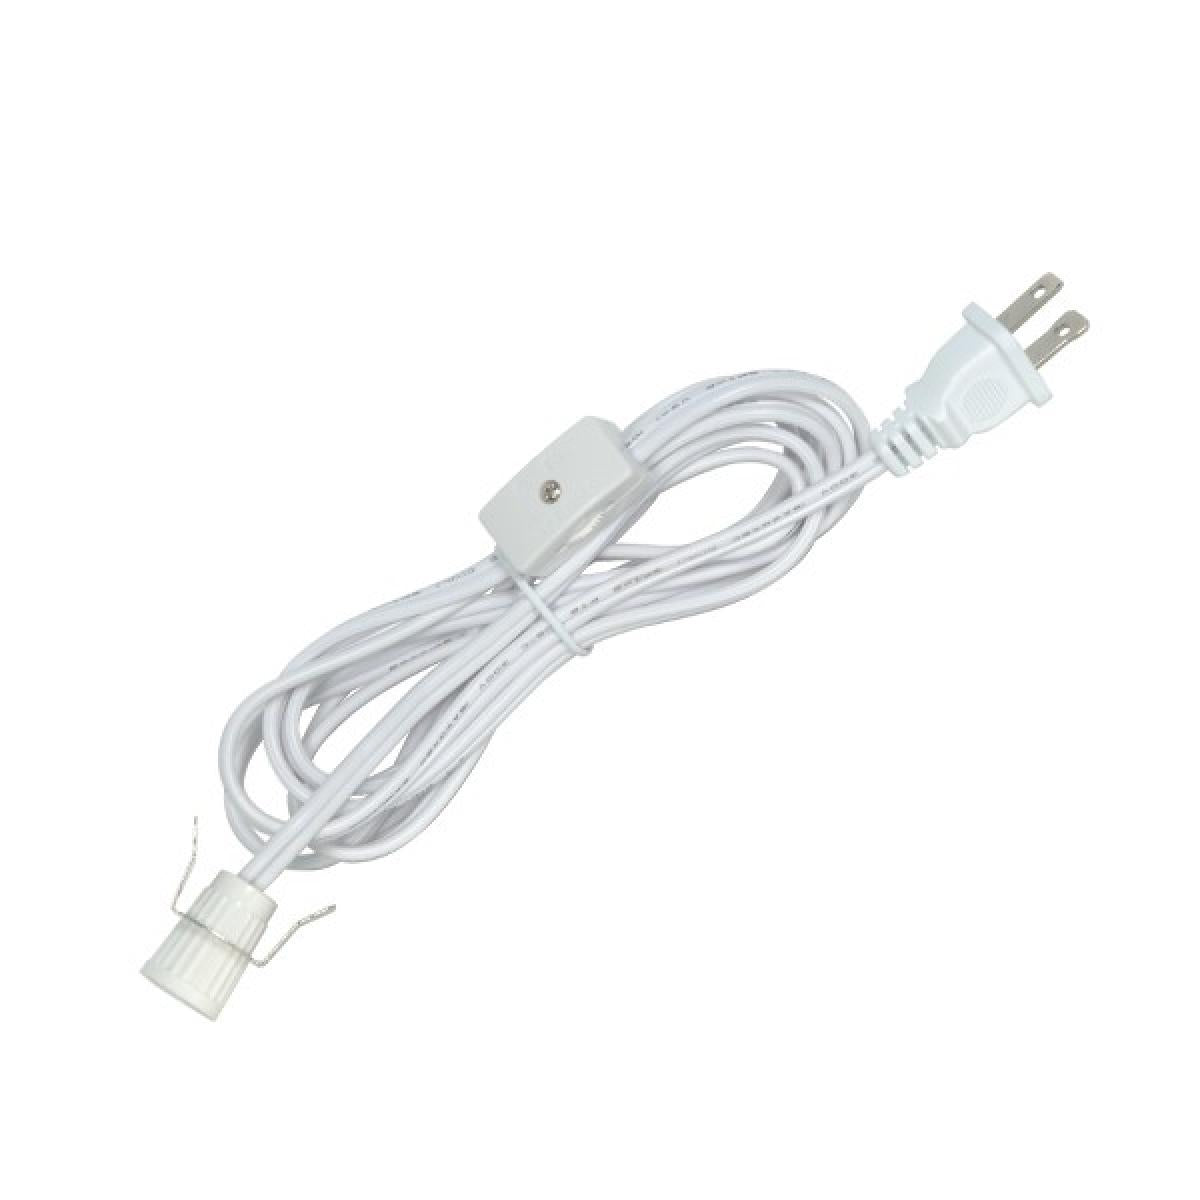 Satco 80-1788 8 Foot #18 SPT-2 White Cord, Switch, And Plug (Switch 17" From Socket)